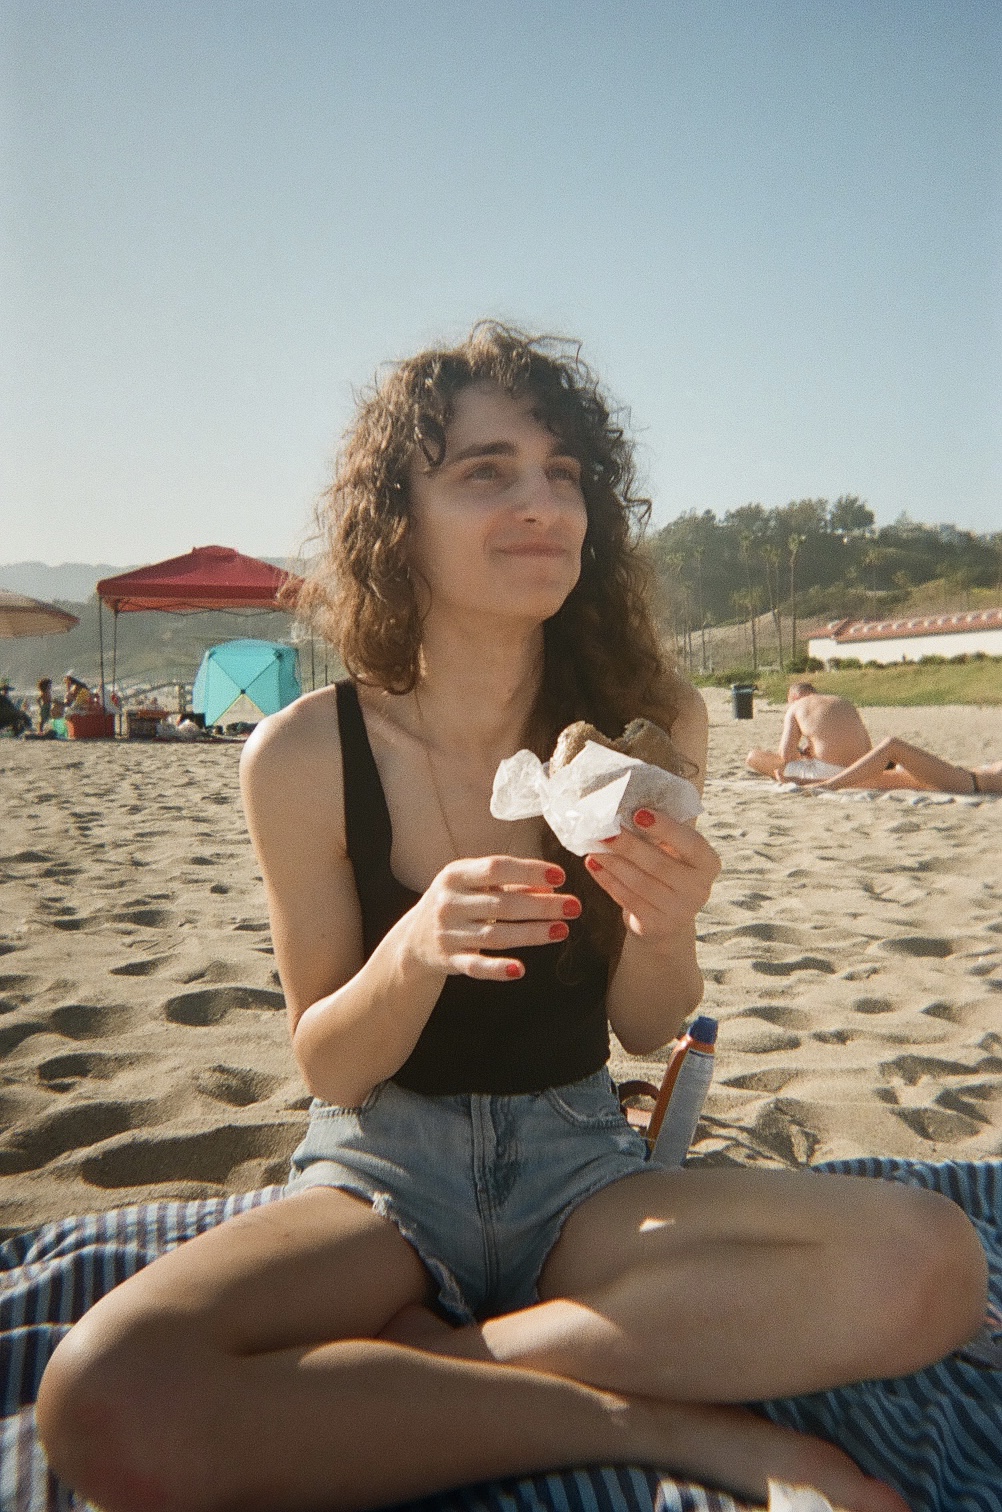 Drew, a white woman with long curly hair, sits cross-legged on a towel on the beach while eating an ice cream sandwich